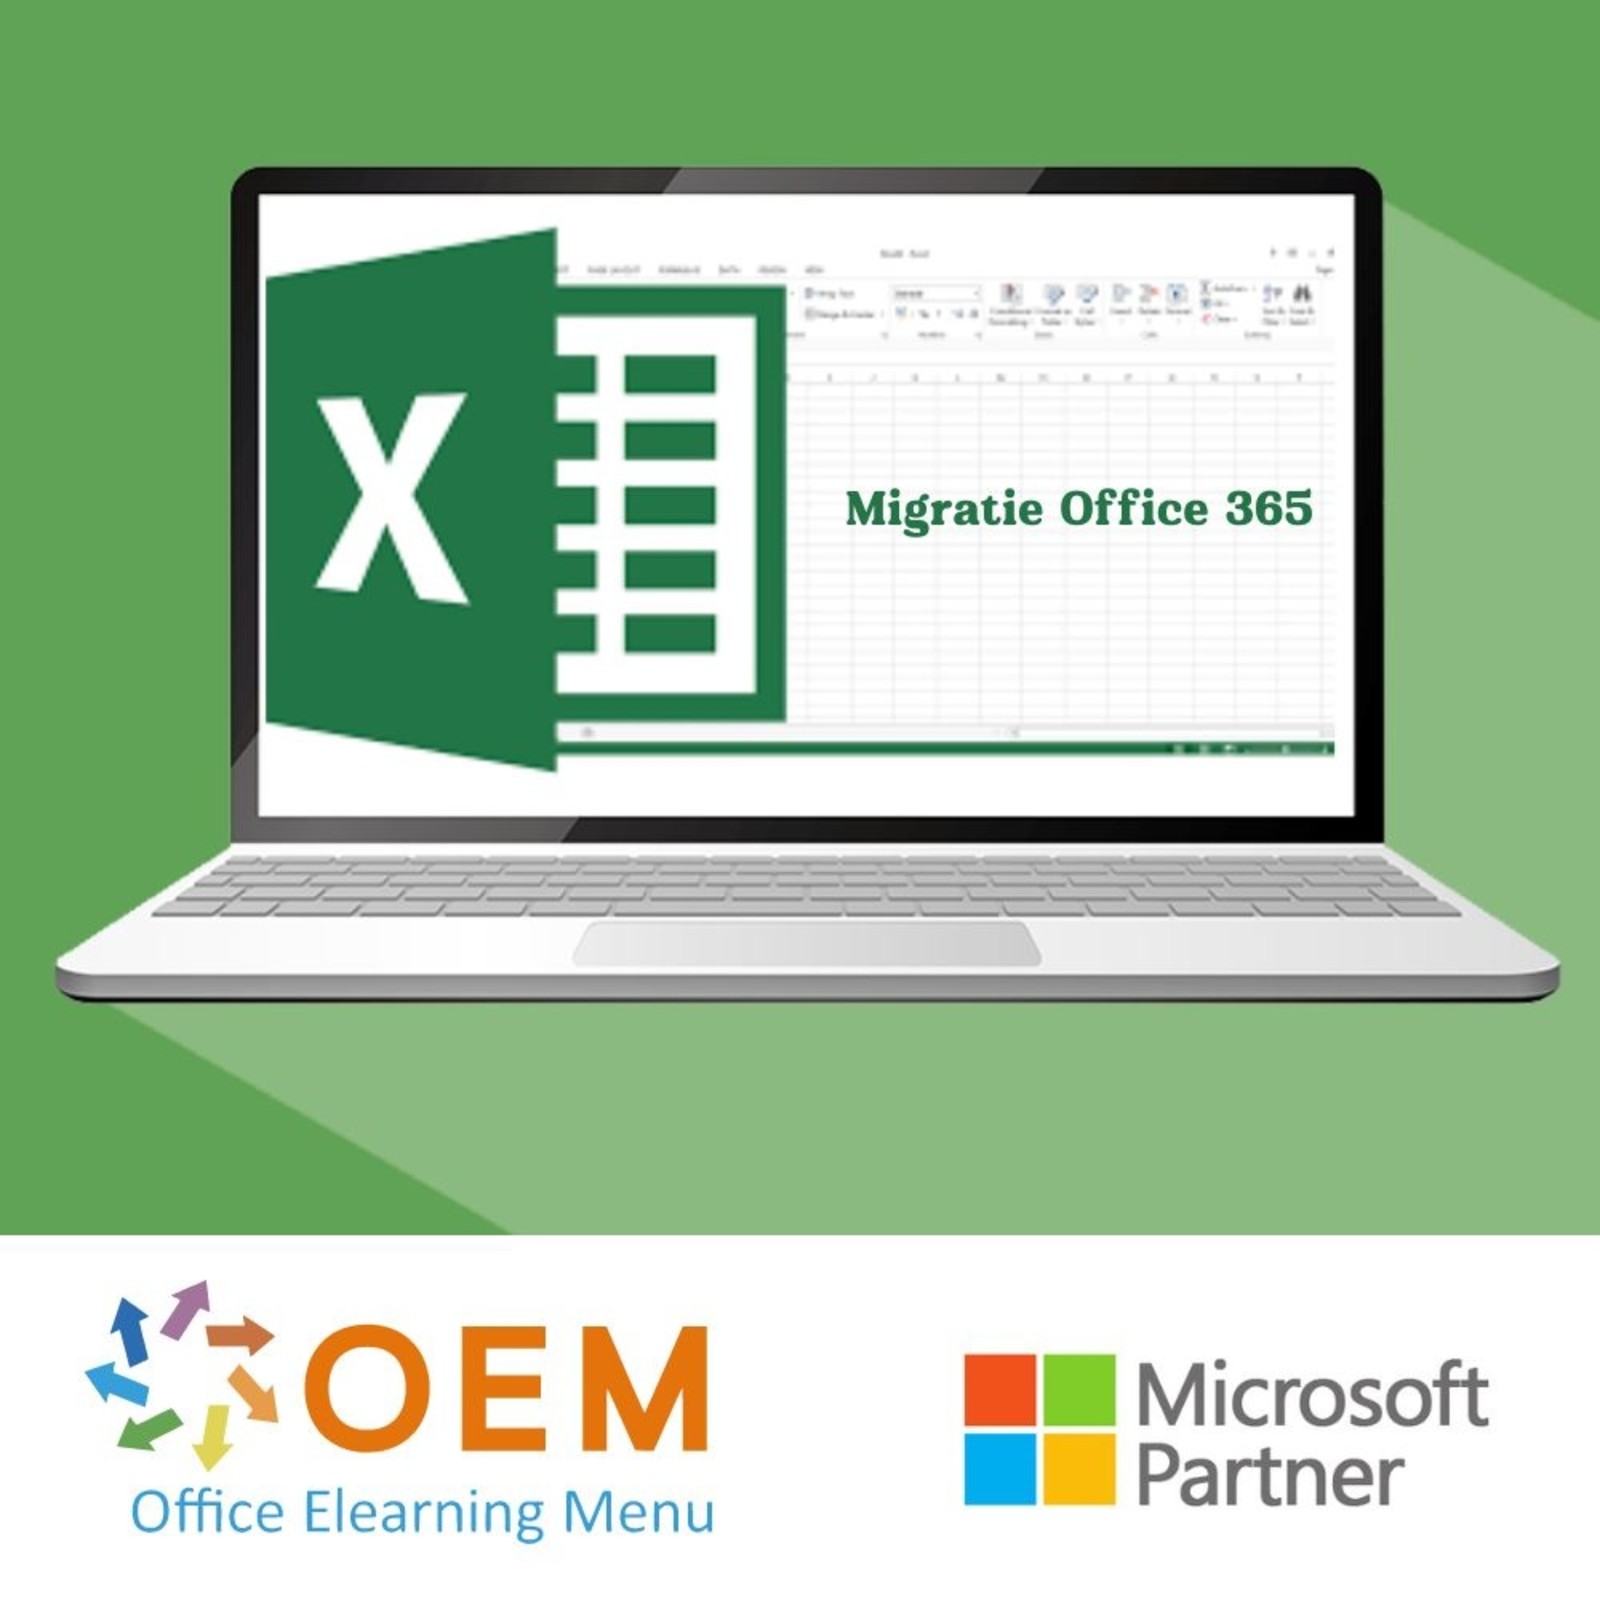 Microsoft Office 365 Migration Office 365 Course E-Learning